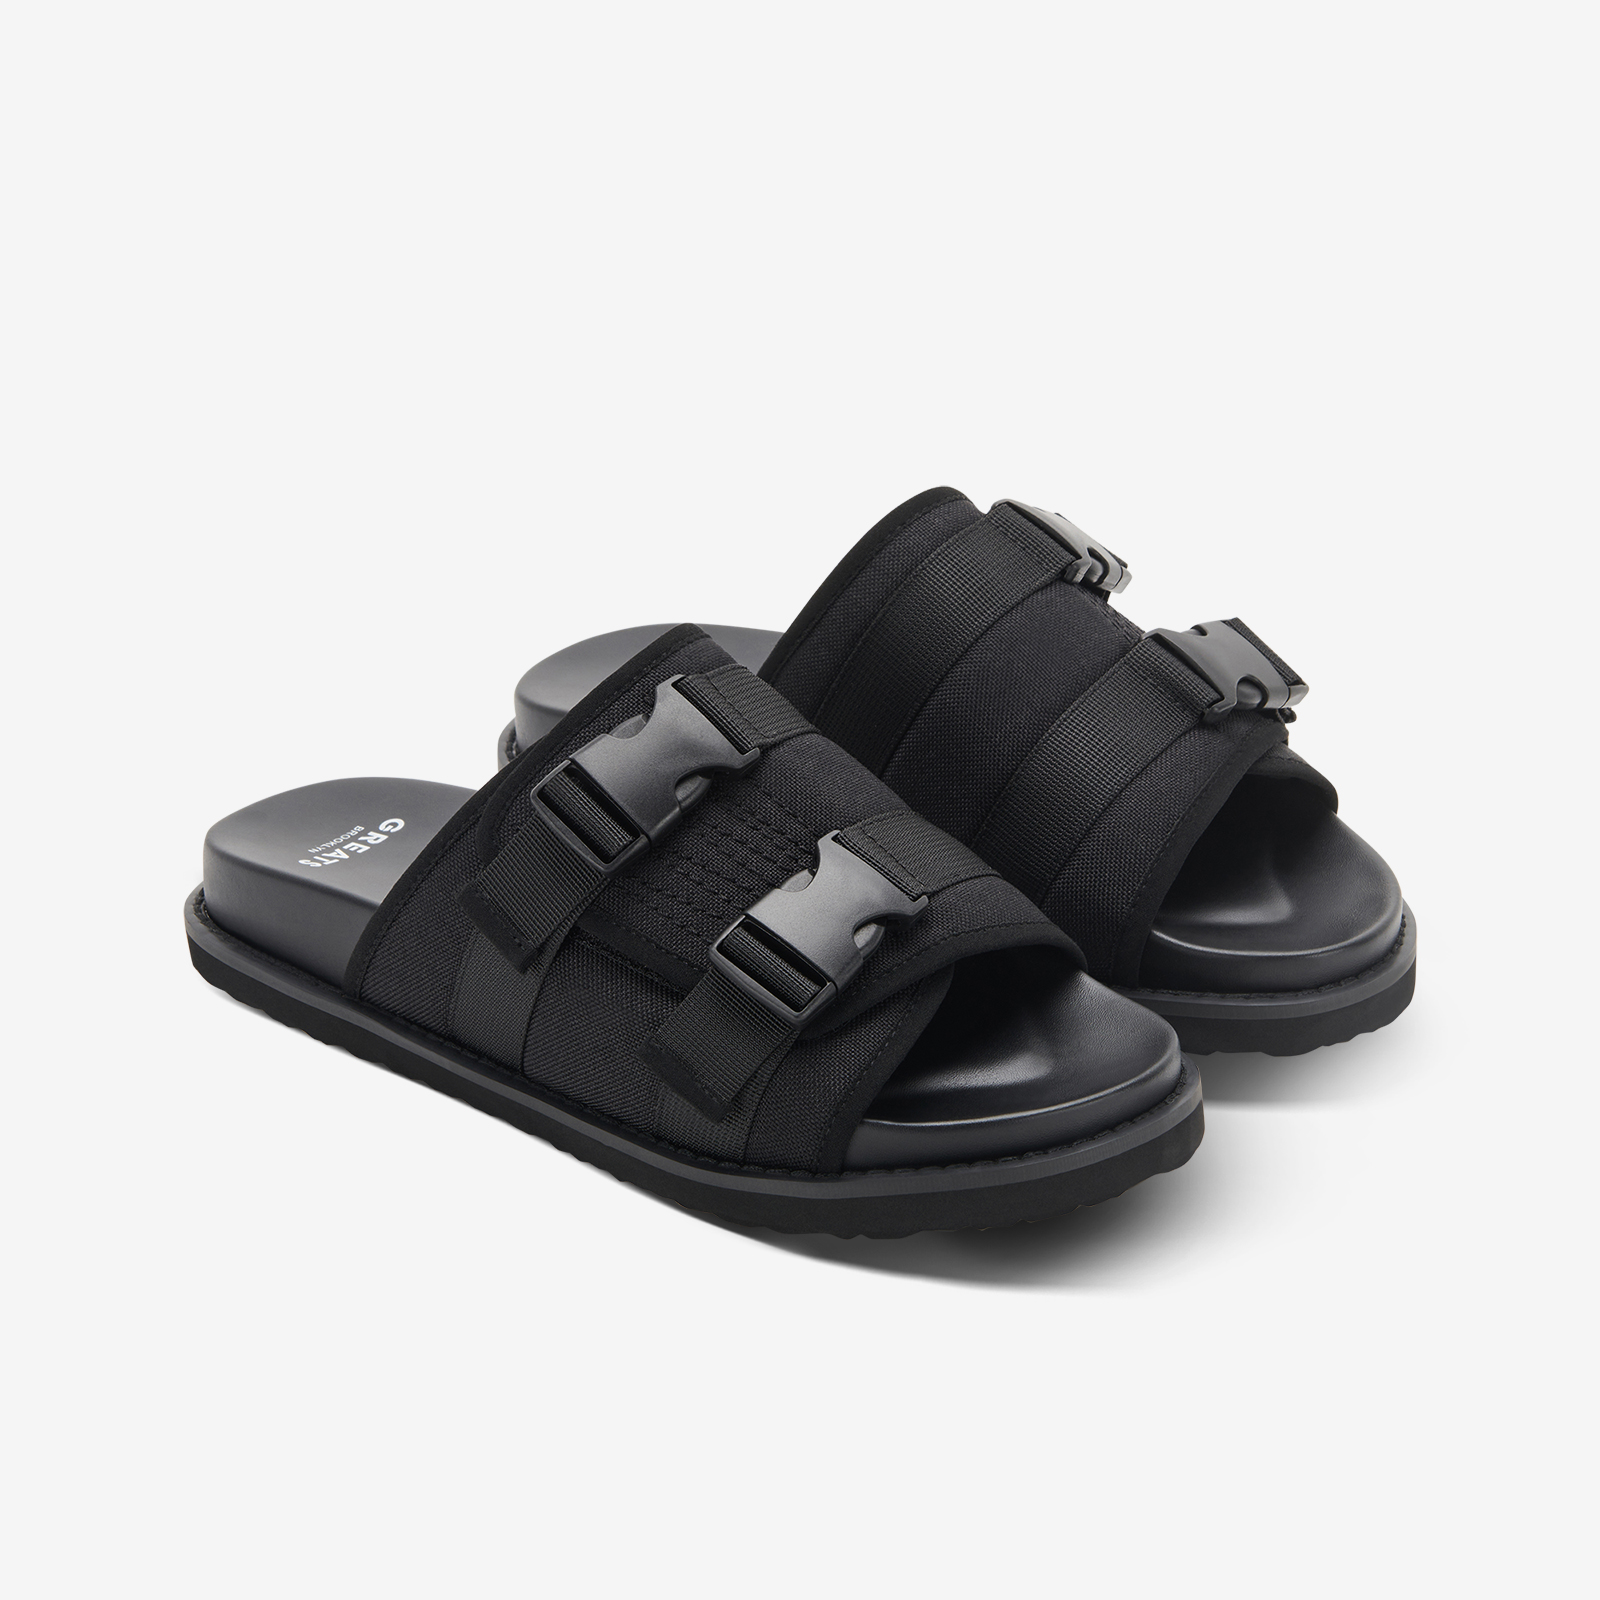 GREATS Just Dropped Comfy New Sandals & Slides Designed For Chilling ...